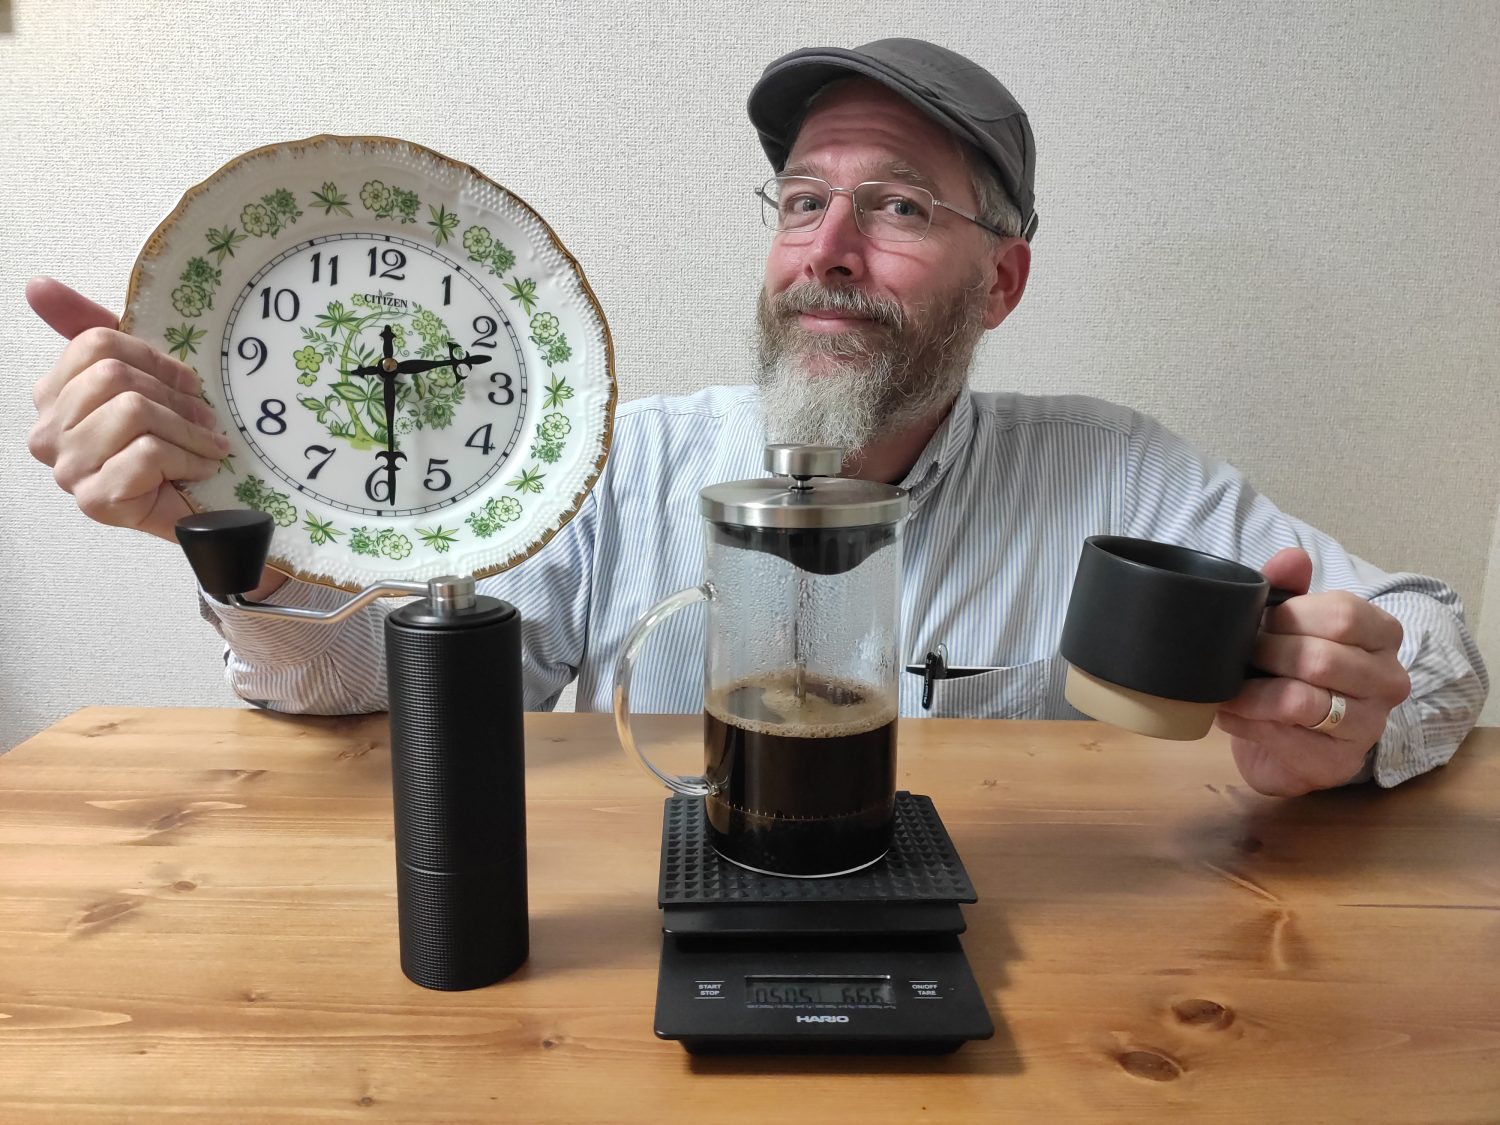 james-with-french-press-and-clock